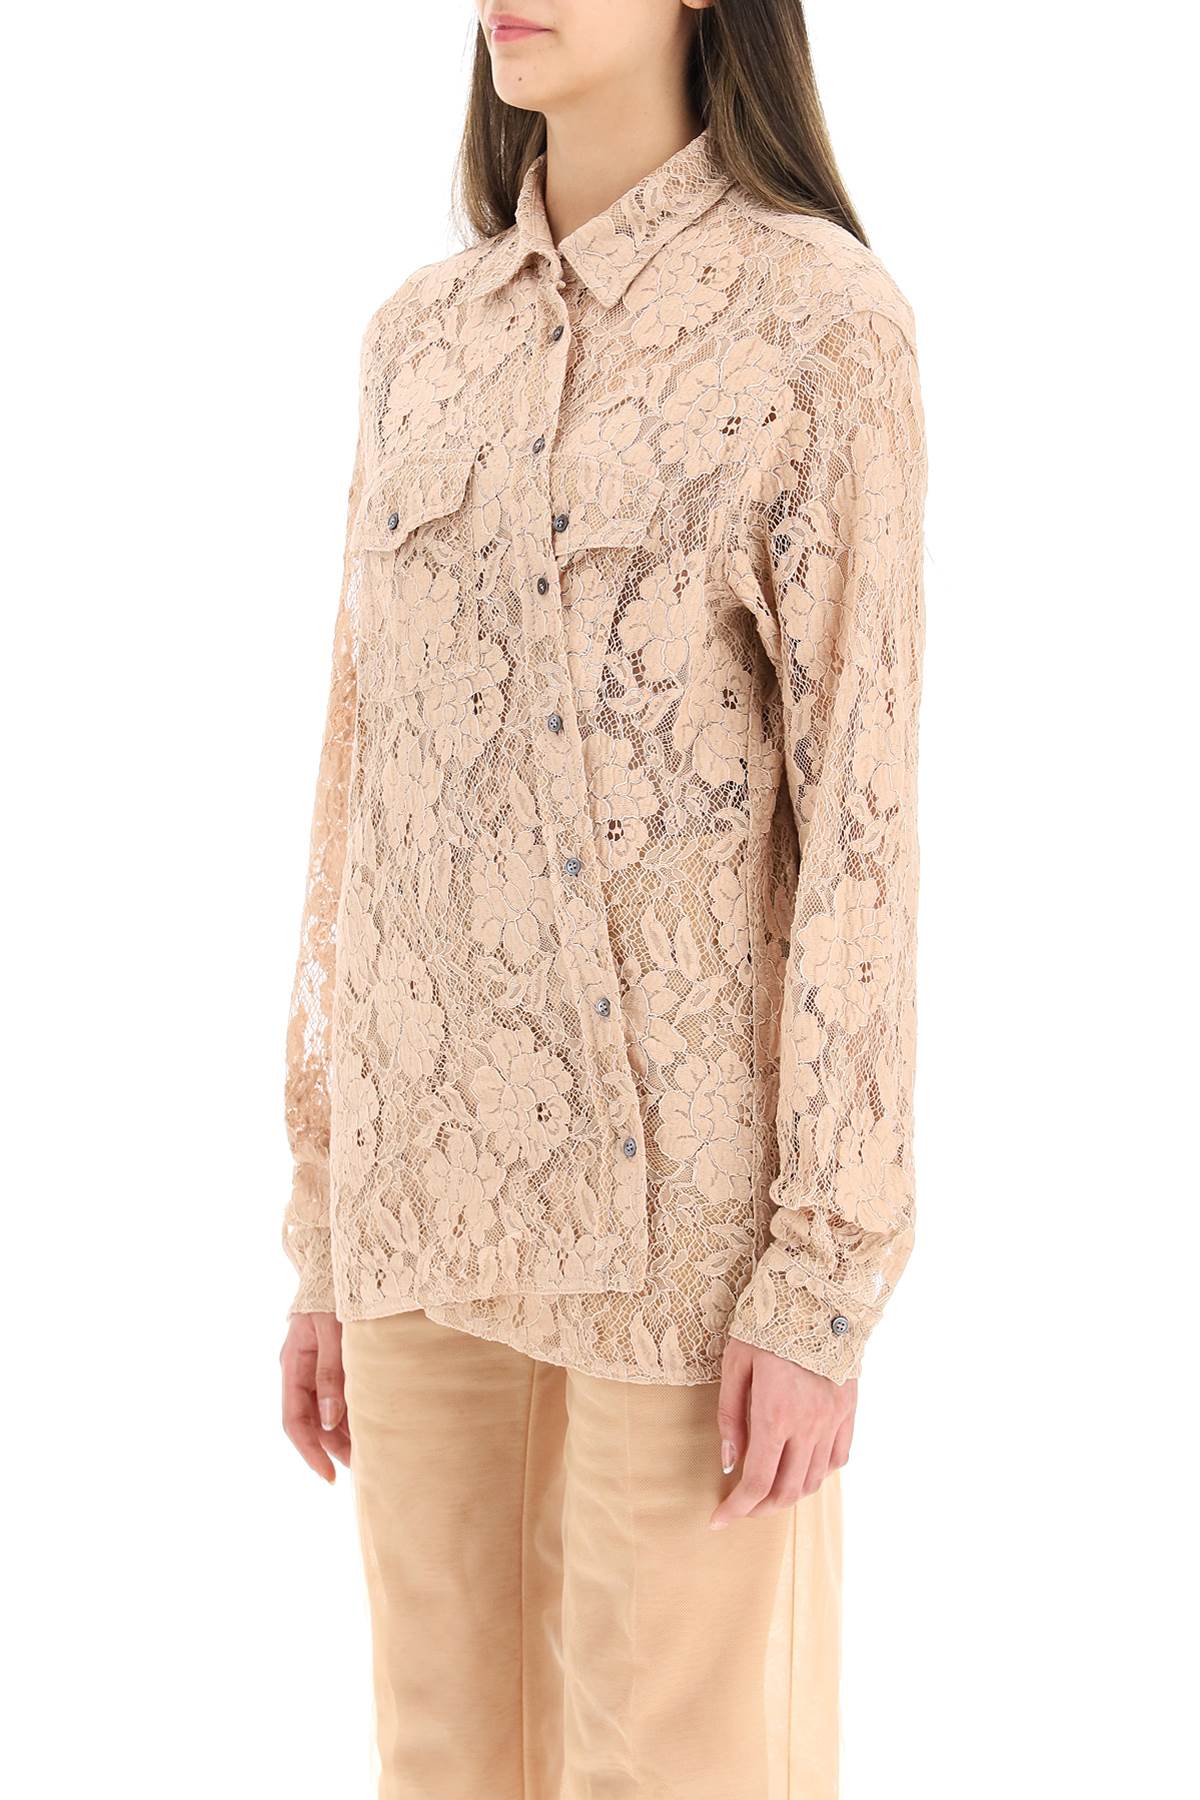 N.21 Asymettrical Buttoning Lace Shirt | italist, ALWAYS LIKE A SALE